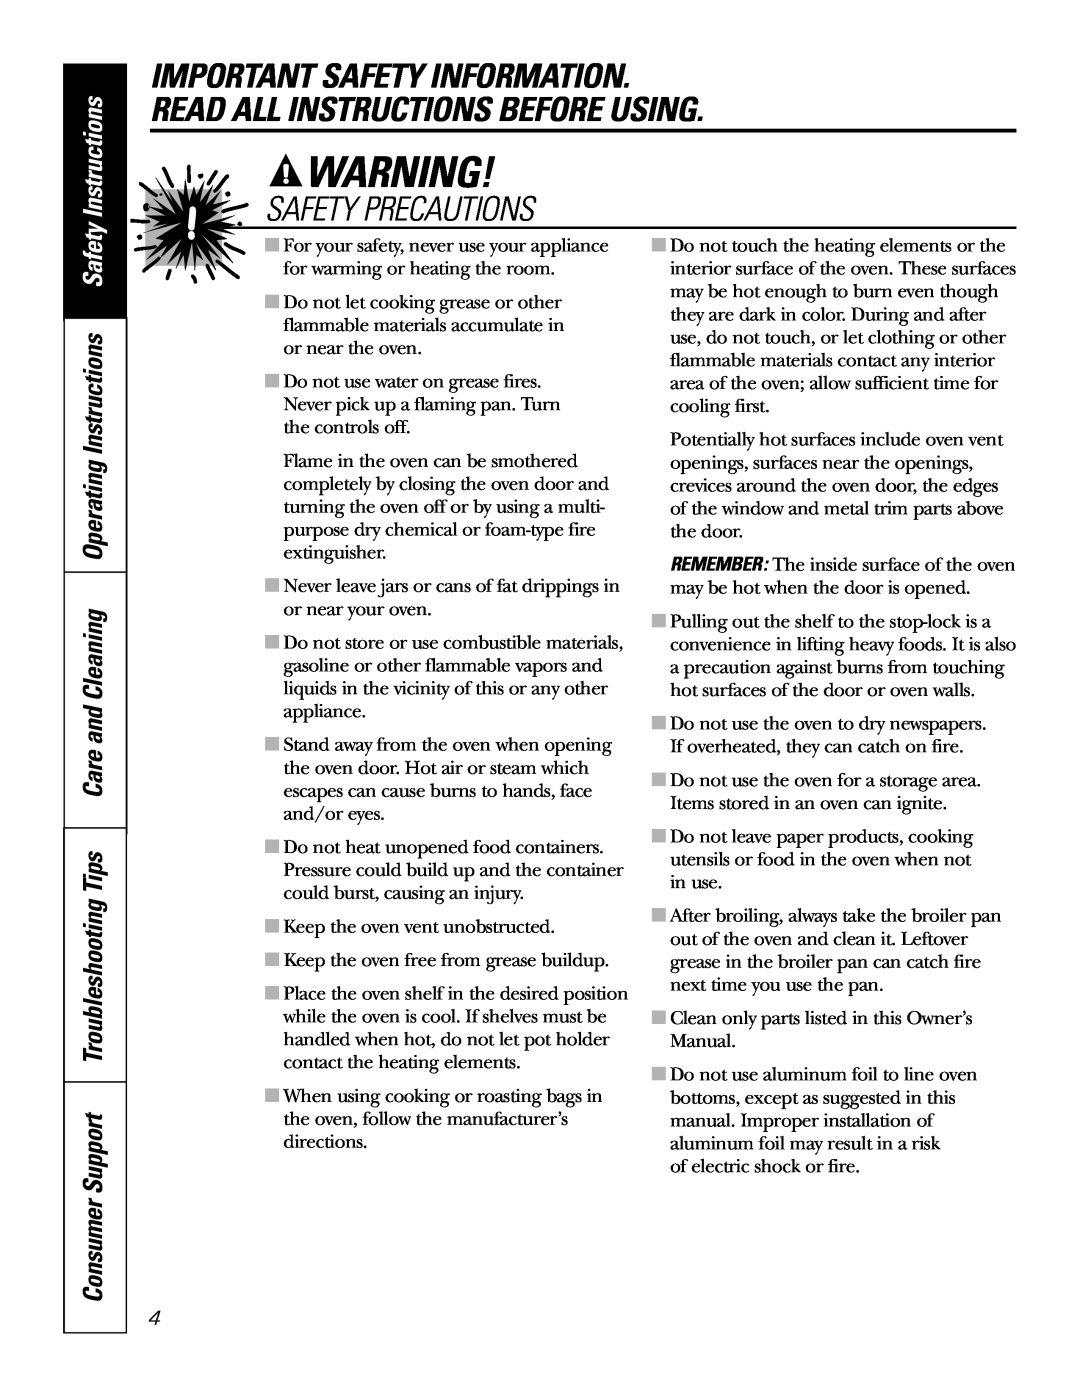 GE JRP20 owner manual Instructions, Safety Precautions 